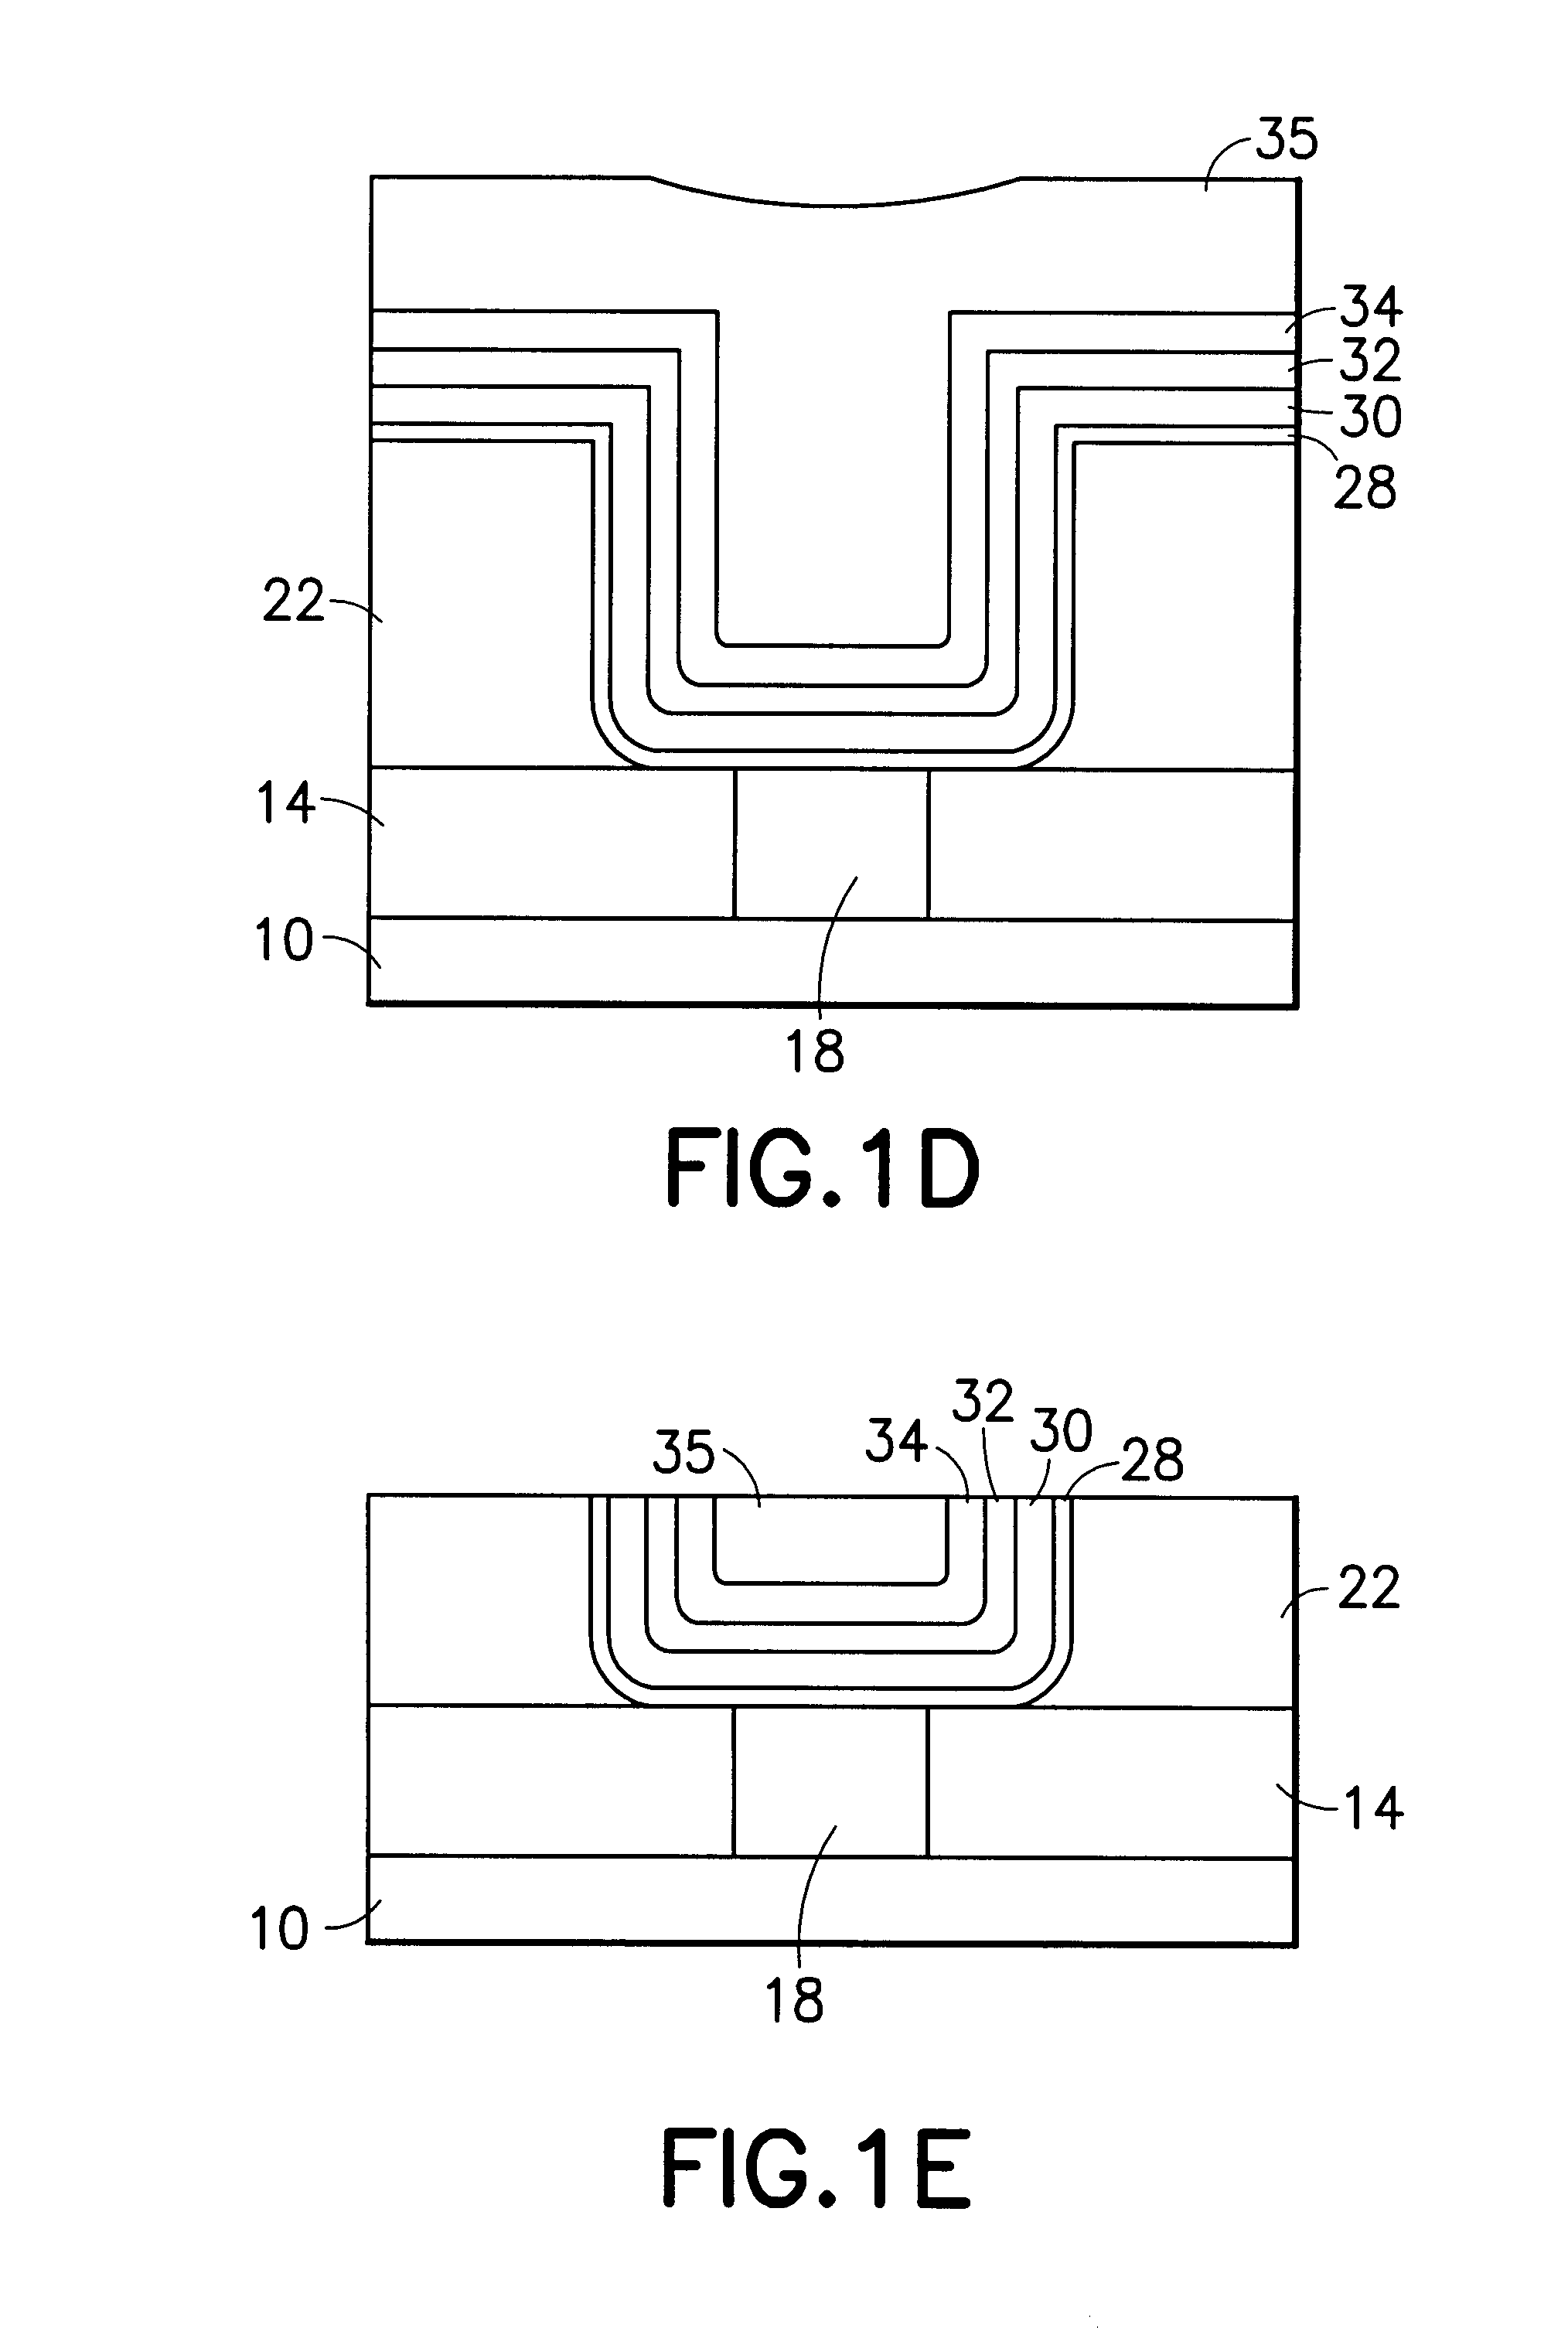 Compositions and structures for chemical mechanical polishing of FeRAM capacitors and method of fabricating FeRAM capacitors using same